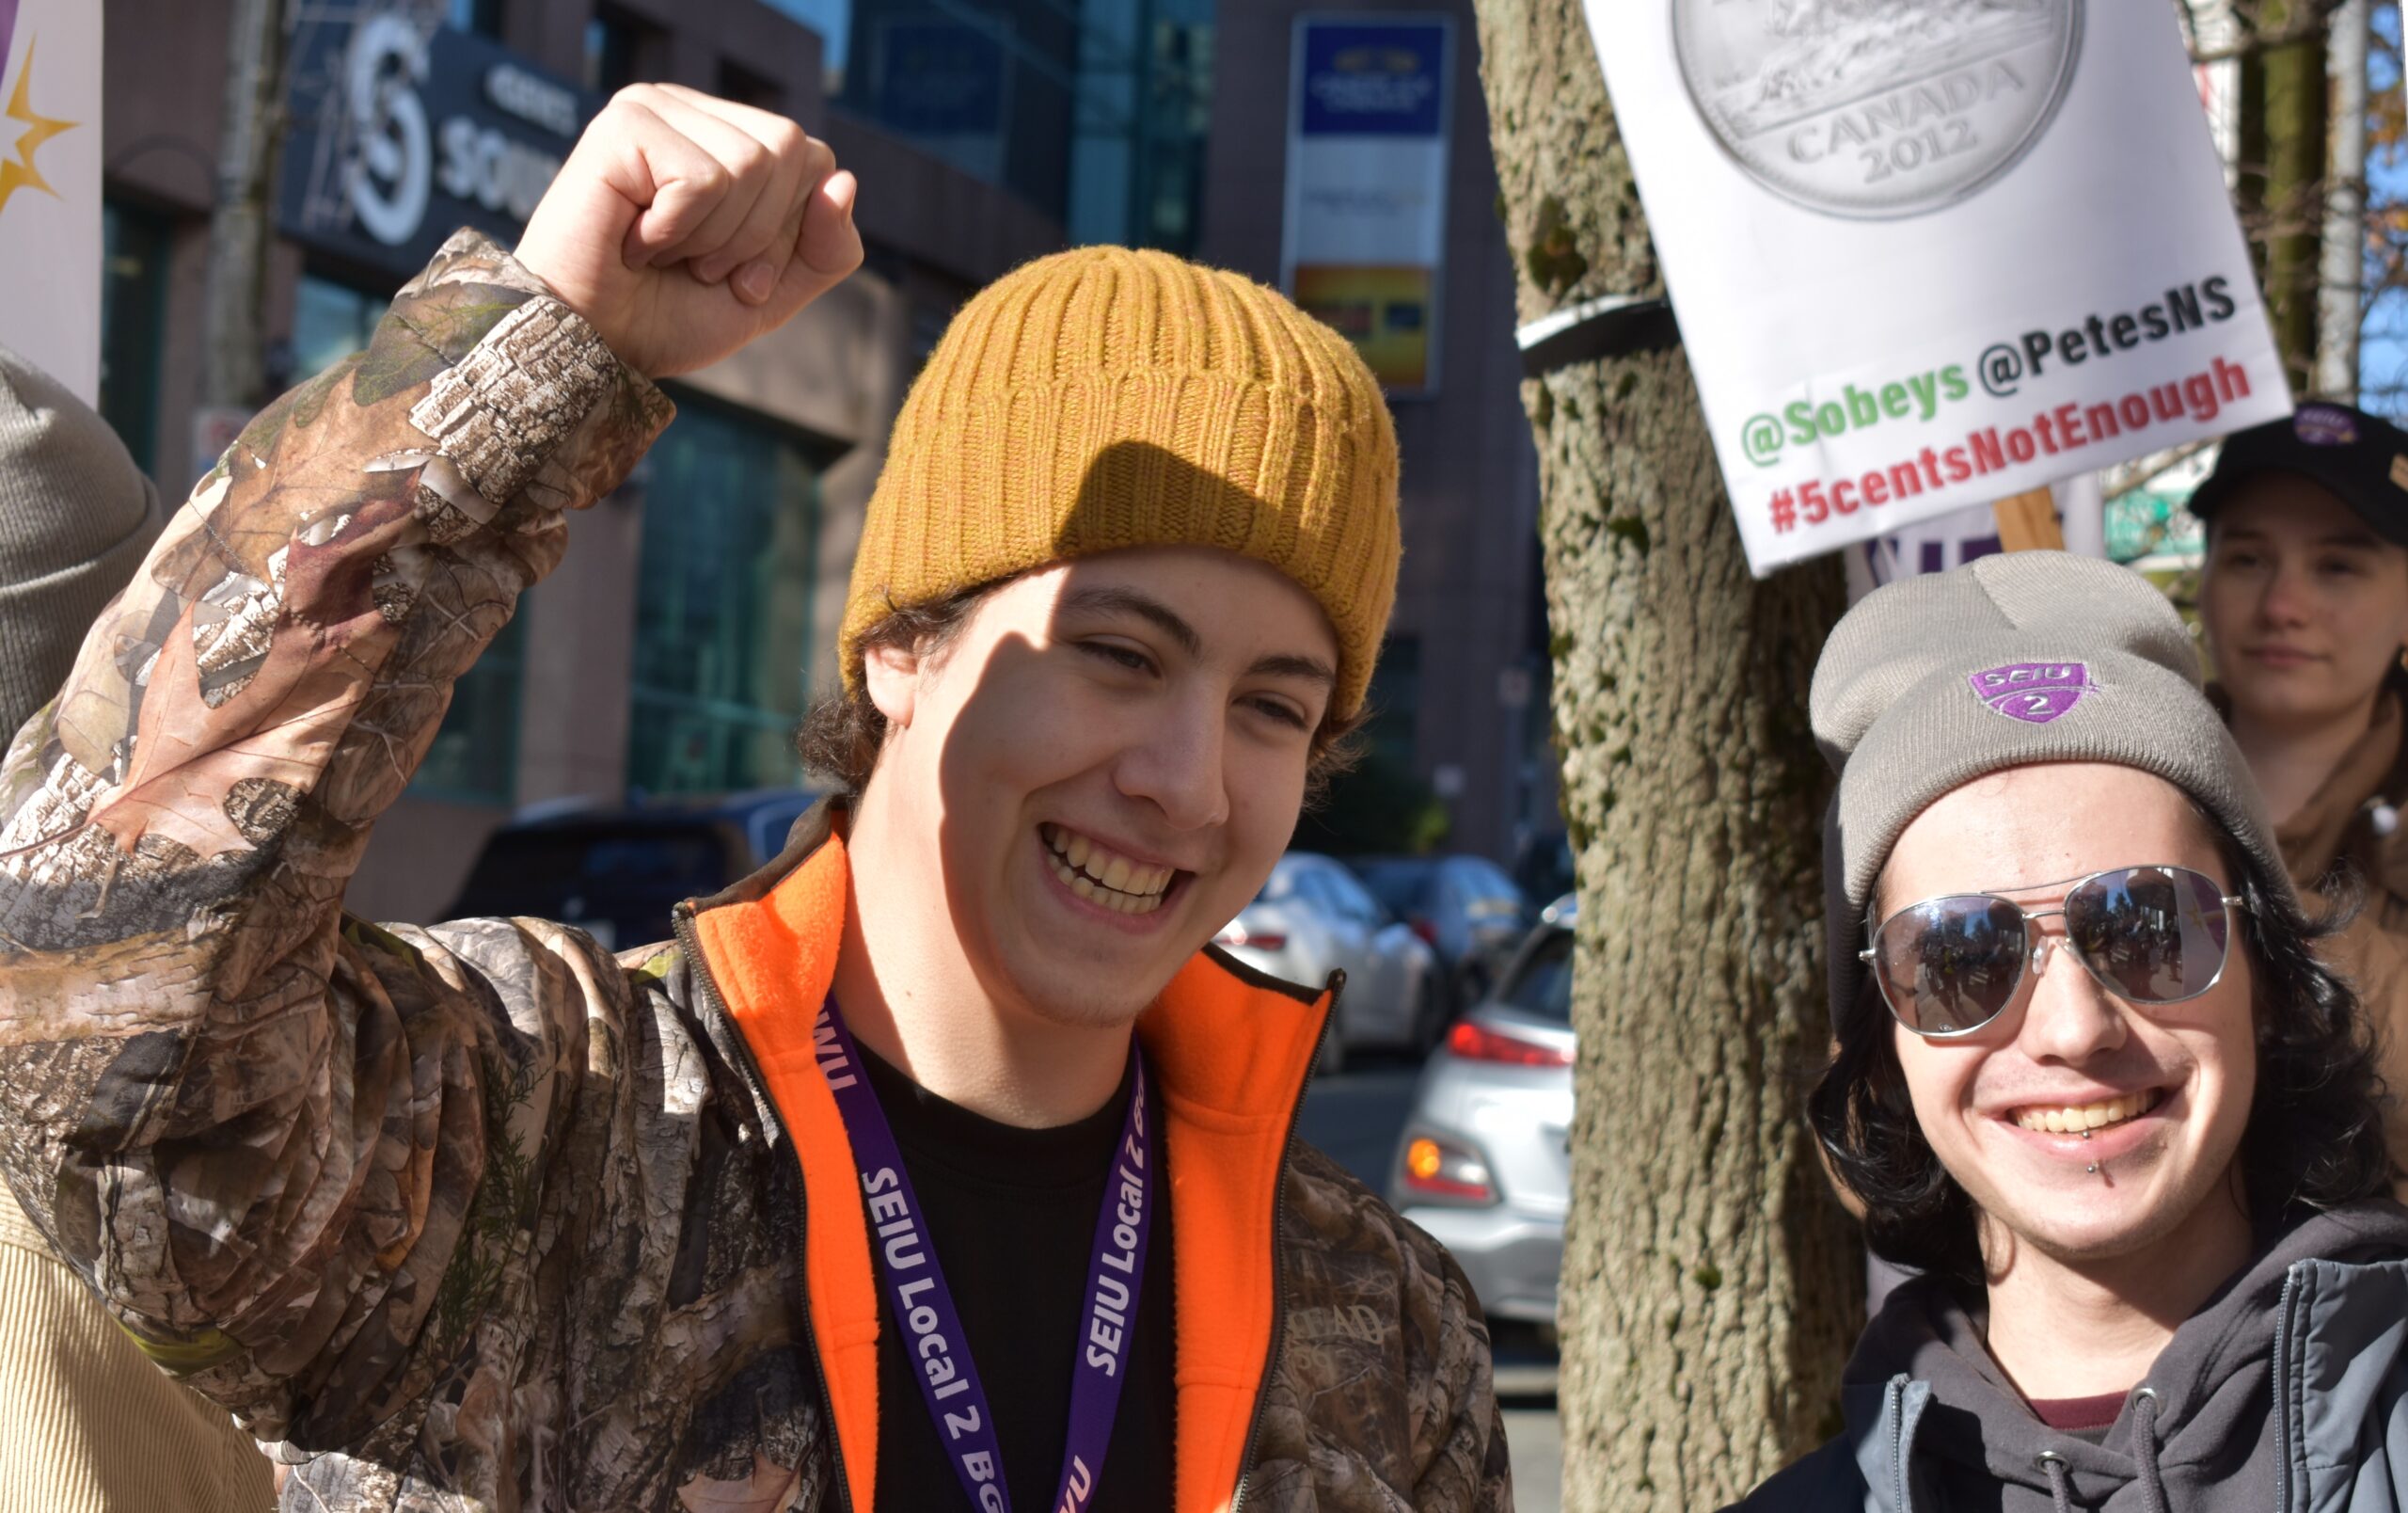 Person on the left has their fist in the air while smiling next to a person wearing a SIEU Local 2 hat on the left.